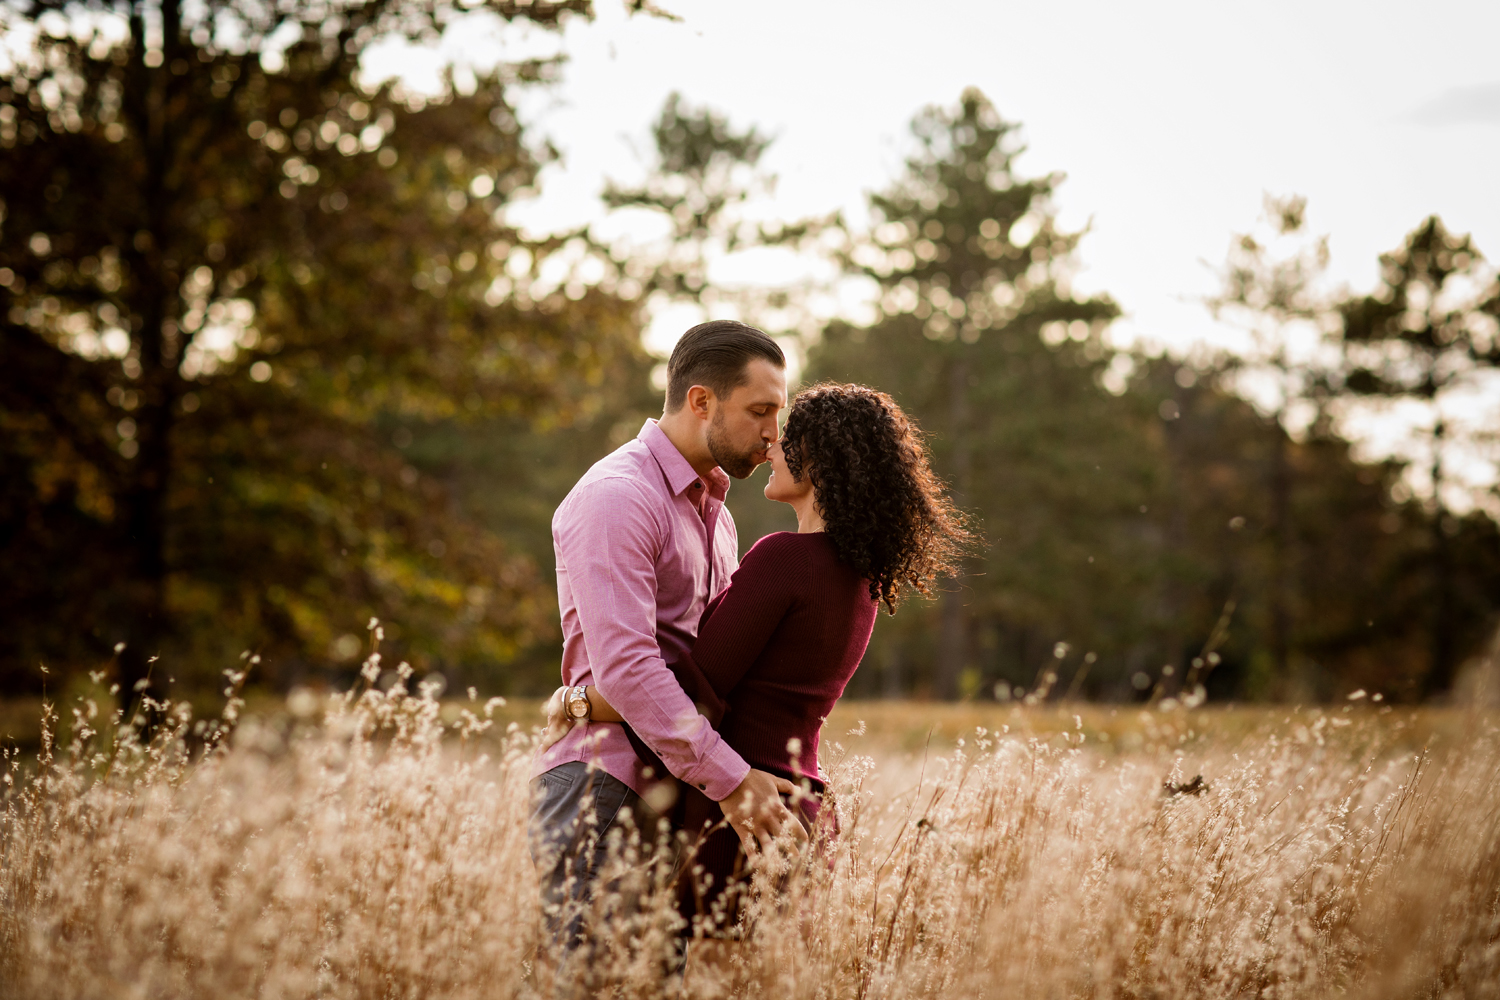 Tracey Buyce Engagement Photography02.jpg